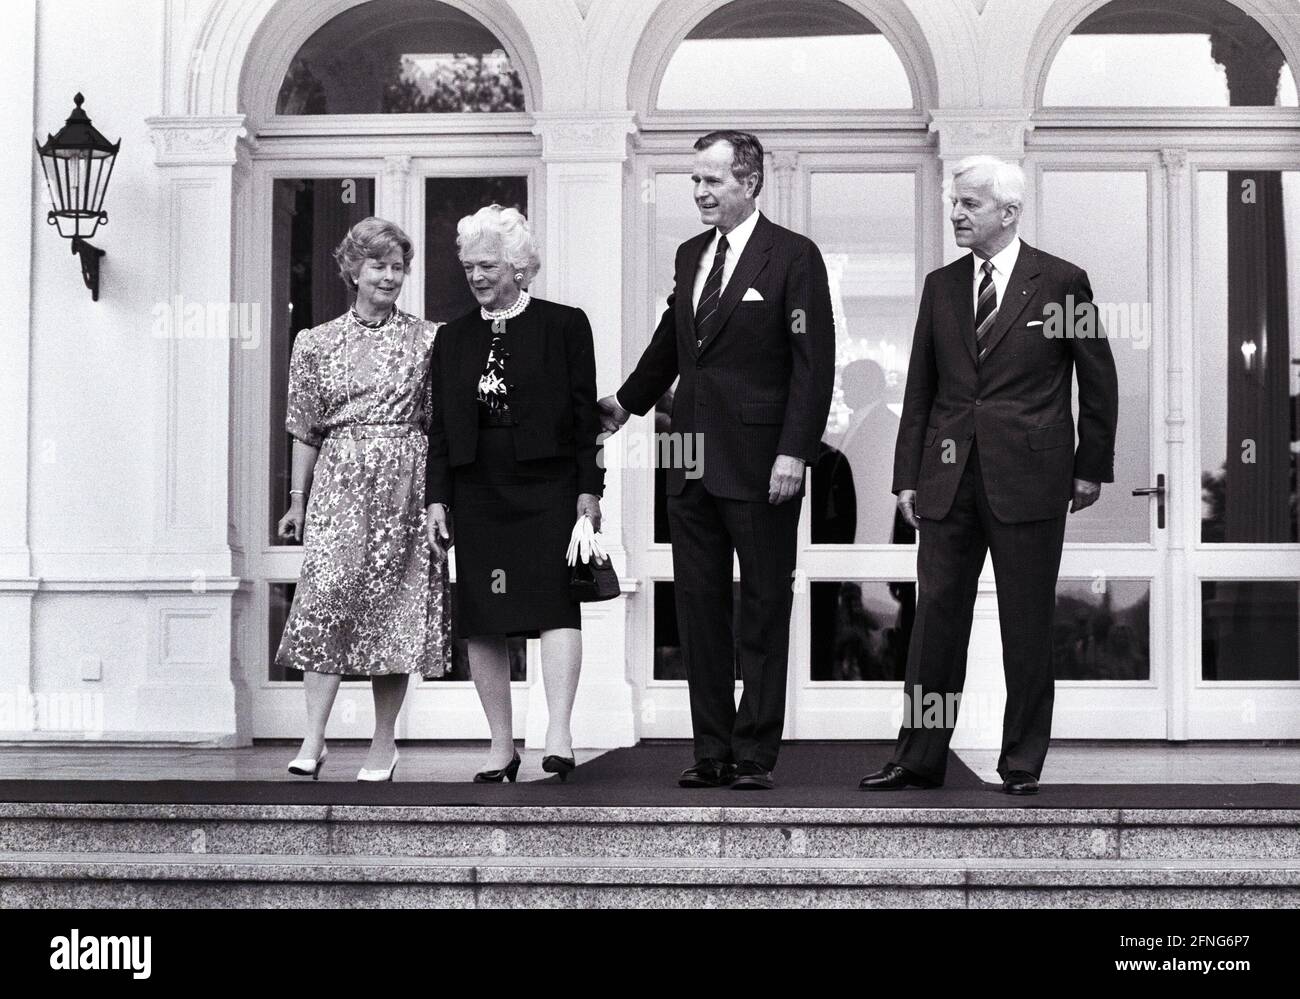 Germany, Bonn, 30.05.1989 Archive No.: 06-63-19 Visit of the American President Photo: from left to right: Marianne von Weizsäcker, Barbara Bush, George H. W. Bush and Federal President Richard von Weizsäcker [automated translation] Stock Photo